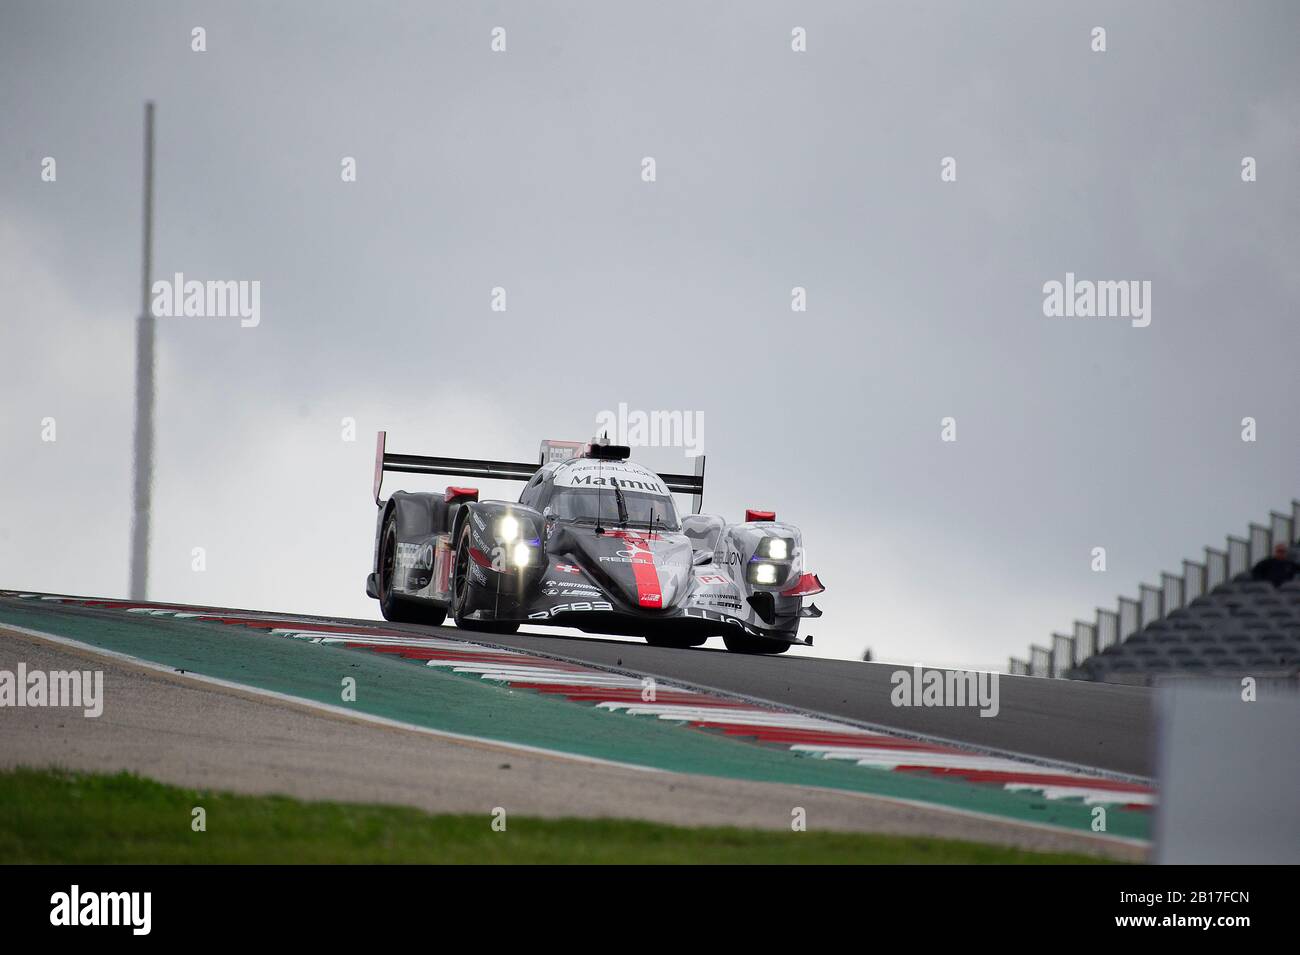 Austin, Texas, USA. 23rd Feb, 2020. Rebellion Racing Bruno Senna (Driver 1), Gustavo Menezes (Driver 2), and Norman Nato (Driver 3) with LMP1 #01 racing the Rebellion R13 Gibson at Lone Star Le Mans - 6 Hours of Circuit of The Americas in Austin, Texas. Mario Cantu/CSM/Alamy Live News Stock Photo